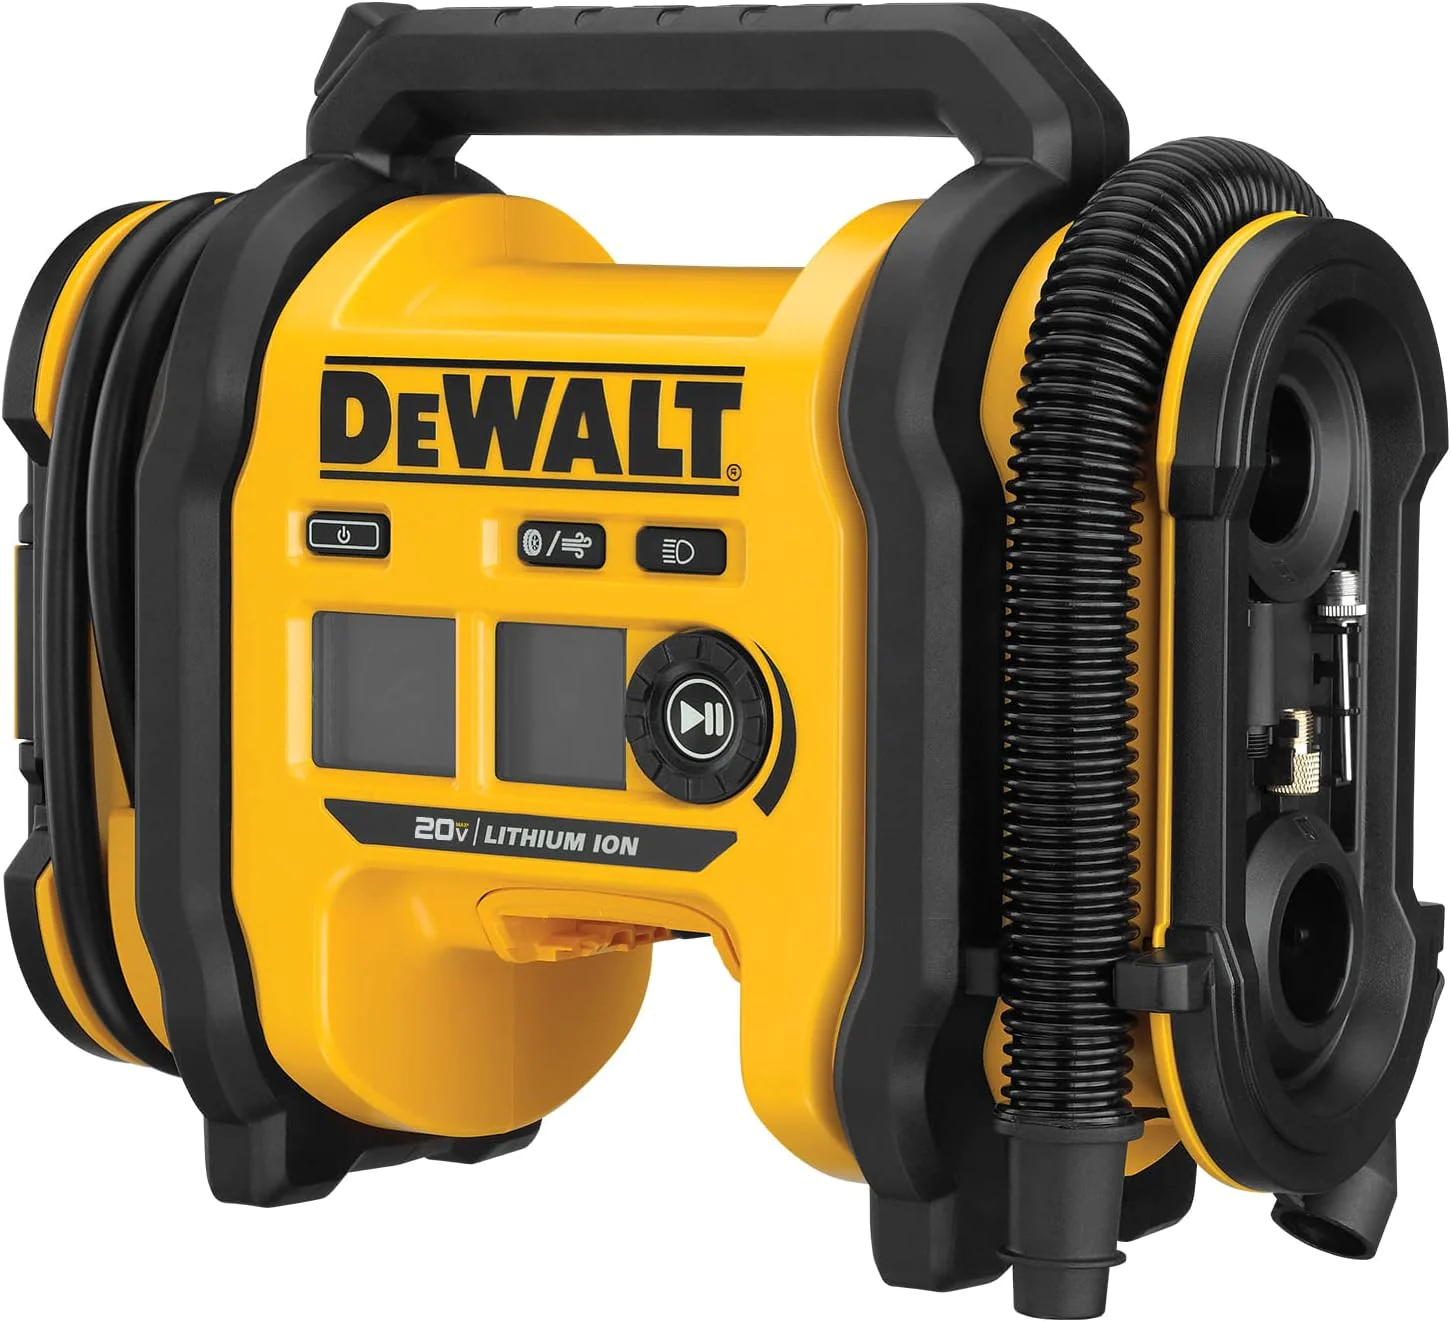 DEWALT 20V MAX Tire Inflator, Compact and Portable, Automatic Shut Off, LED Light